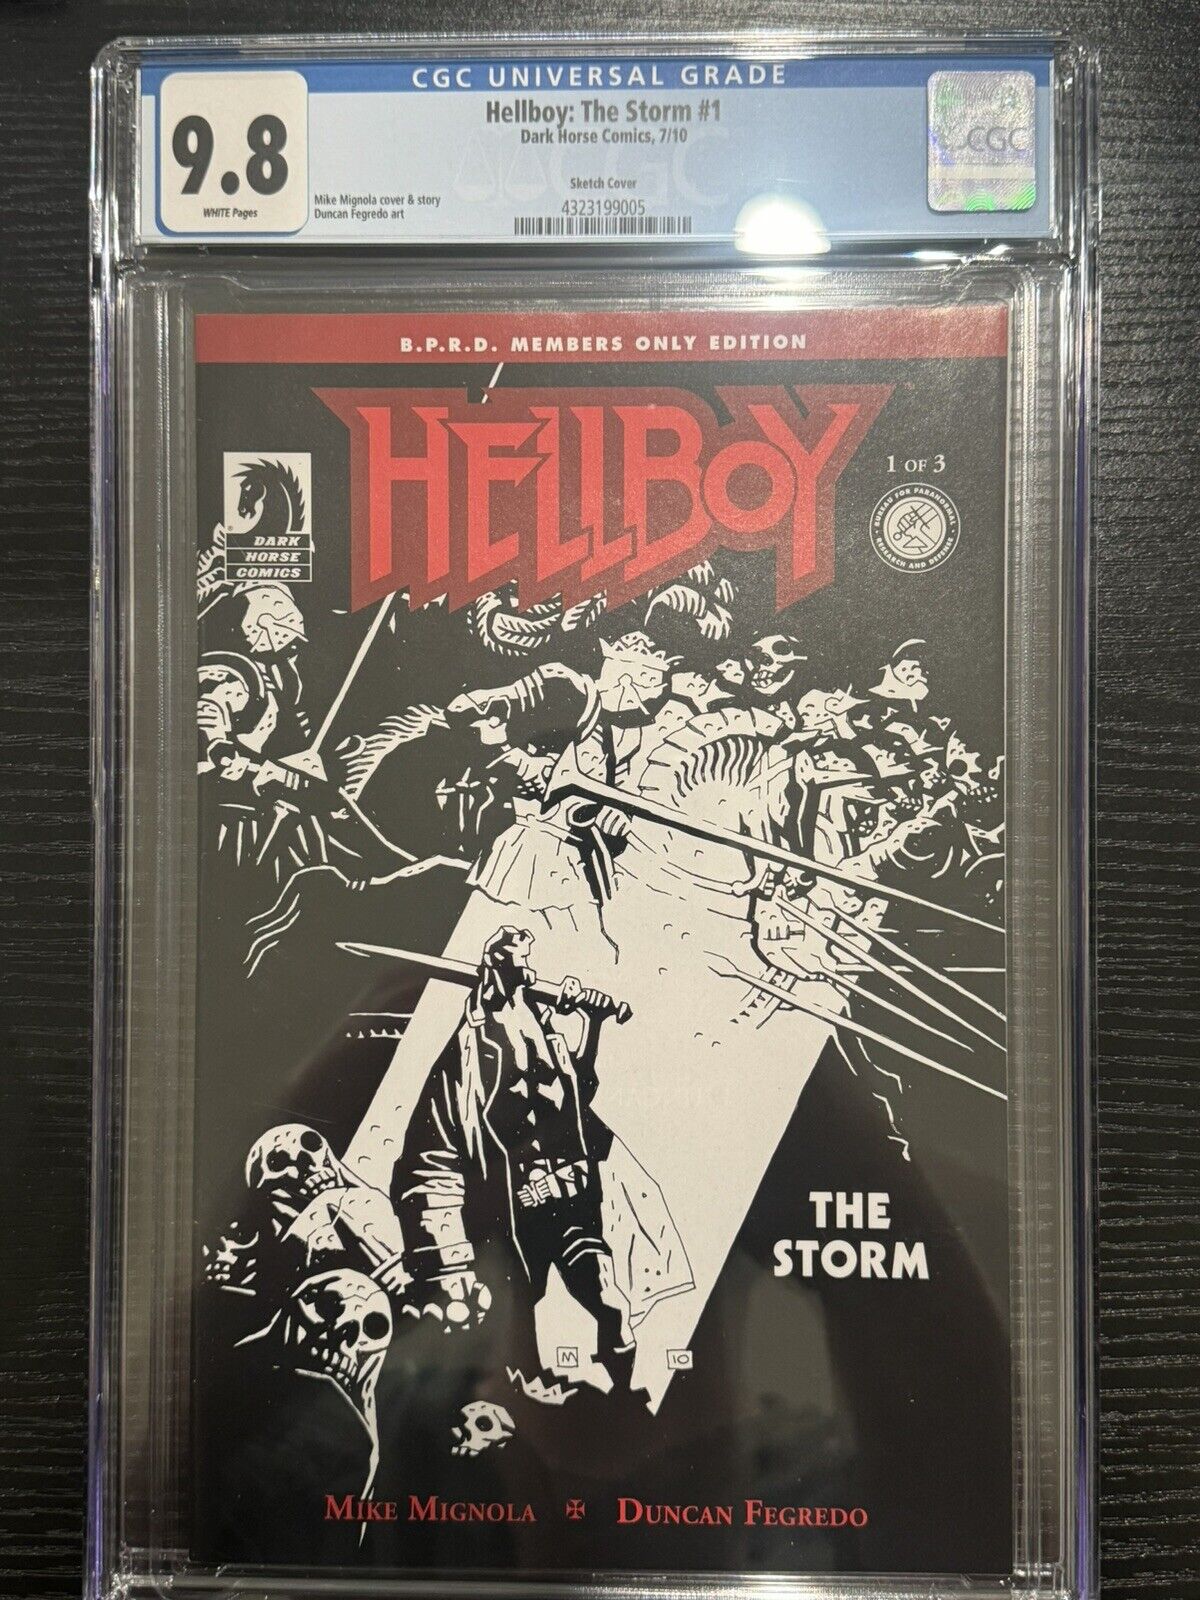 Hellboy: The Storm #1, B.P.R.D. Members Only Sketch Edition, CGC 9.8 NM/MT